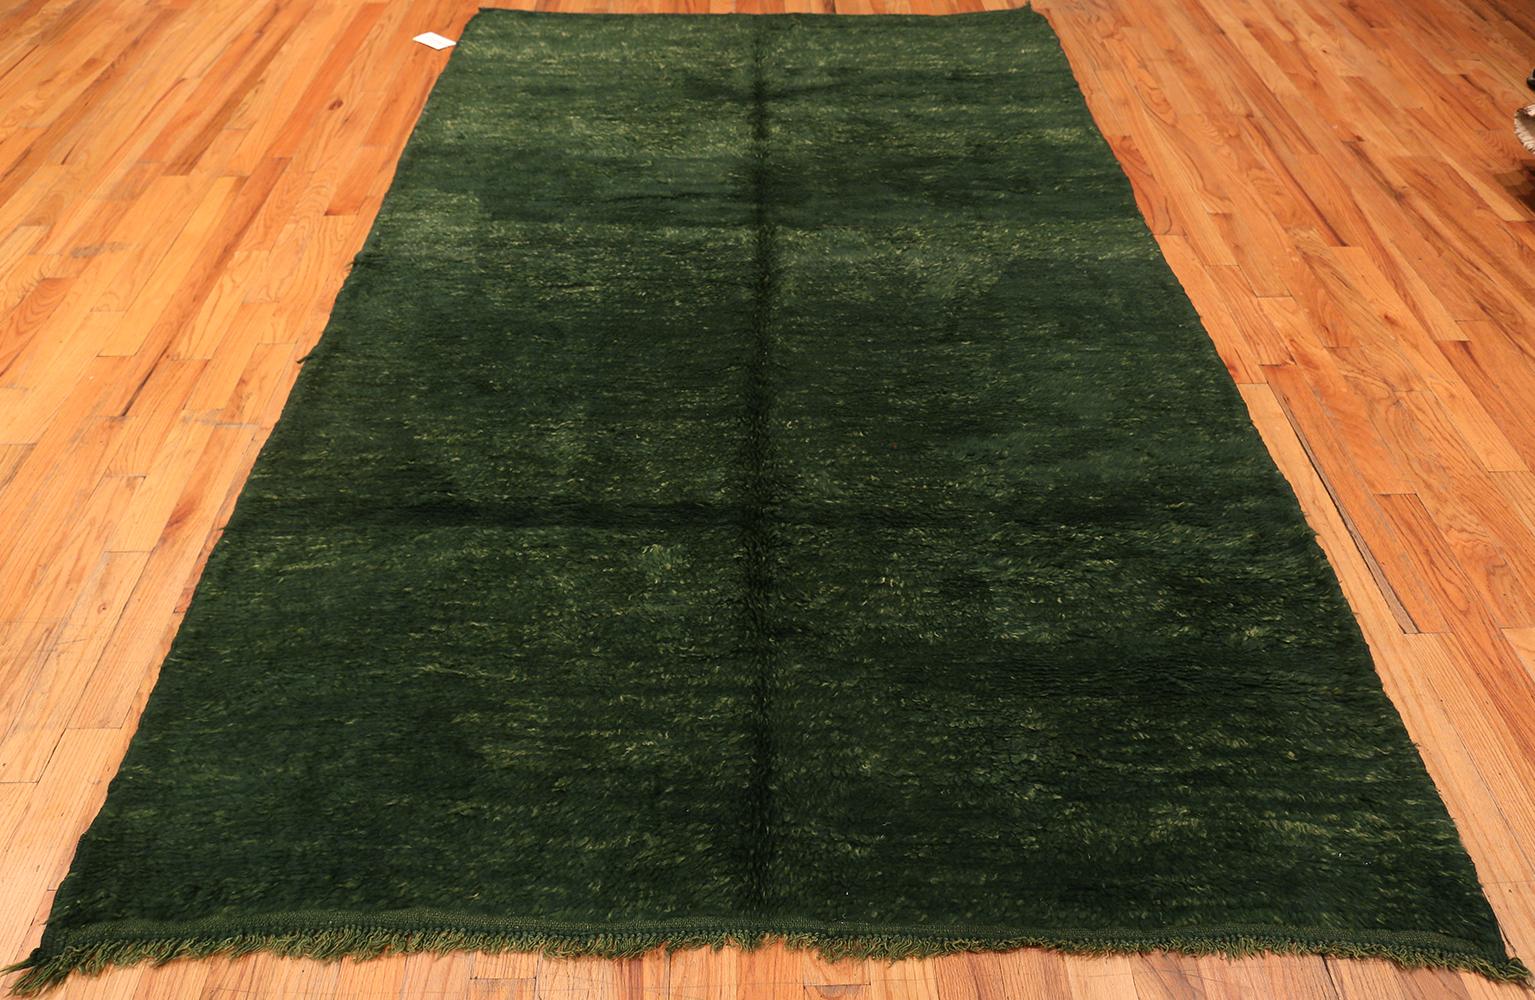 Contemporary Moroccan Emerald Green Rug. Size: 6 ft 2 in x 9 ft 8 in